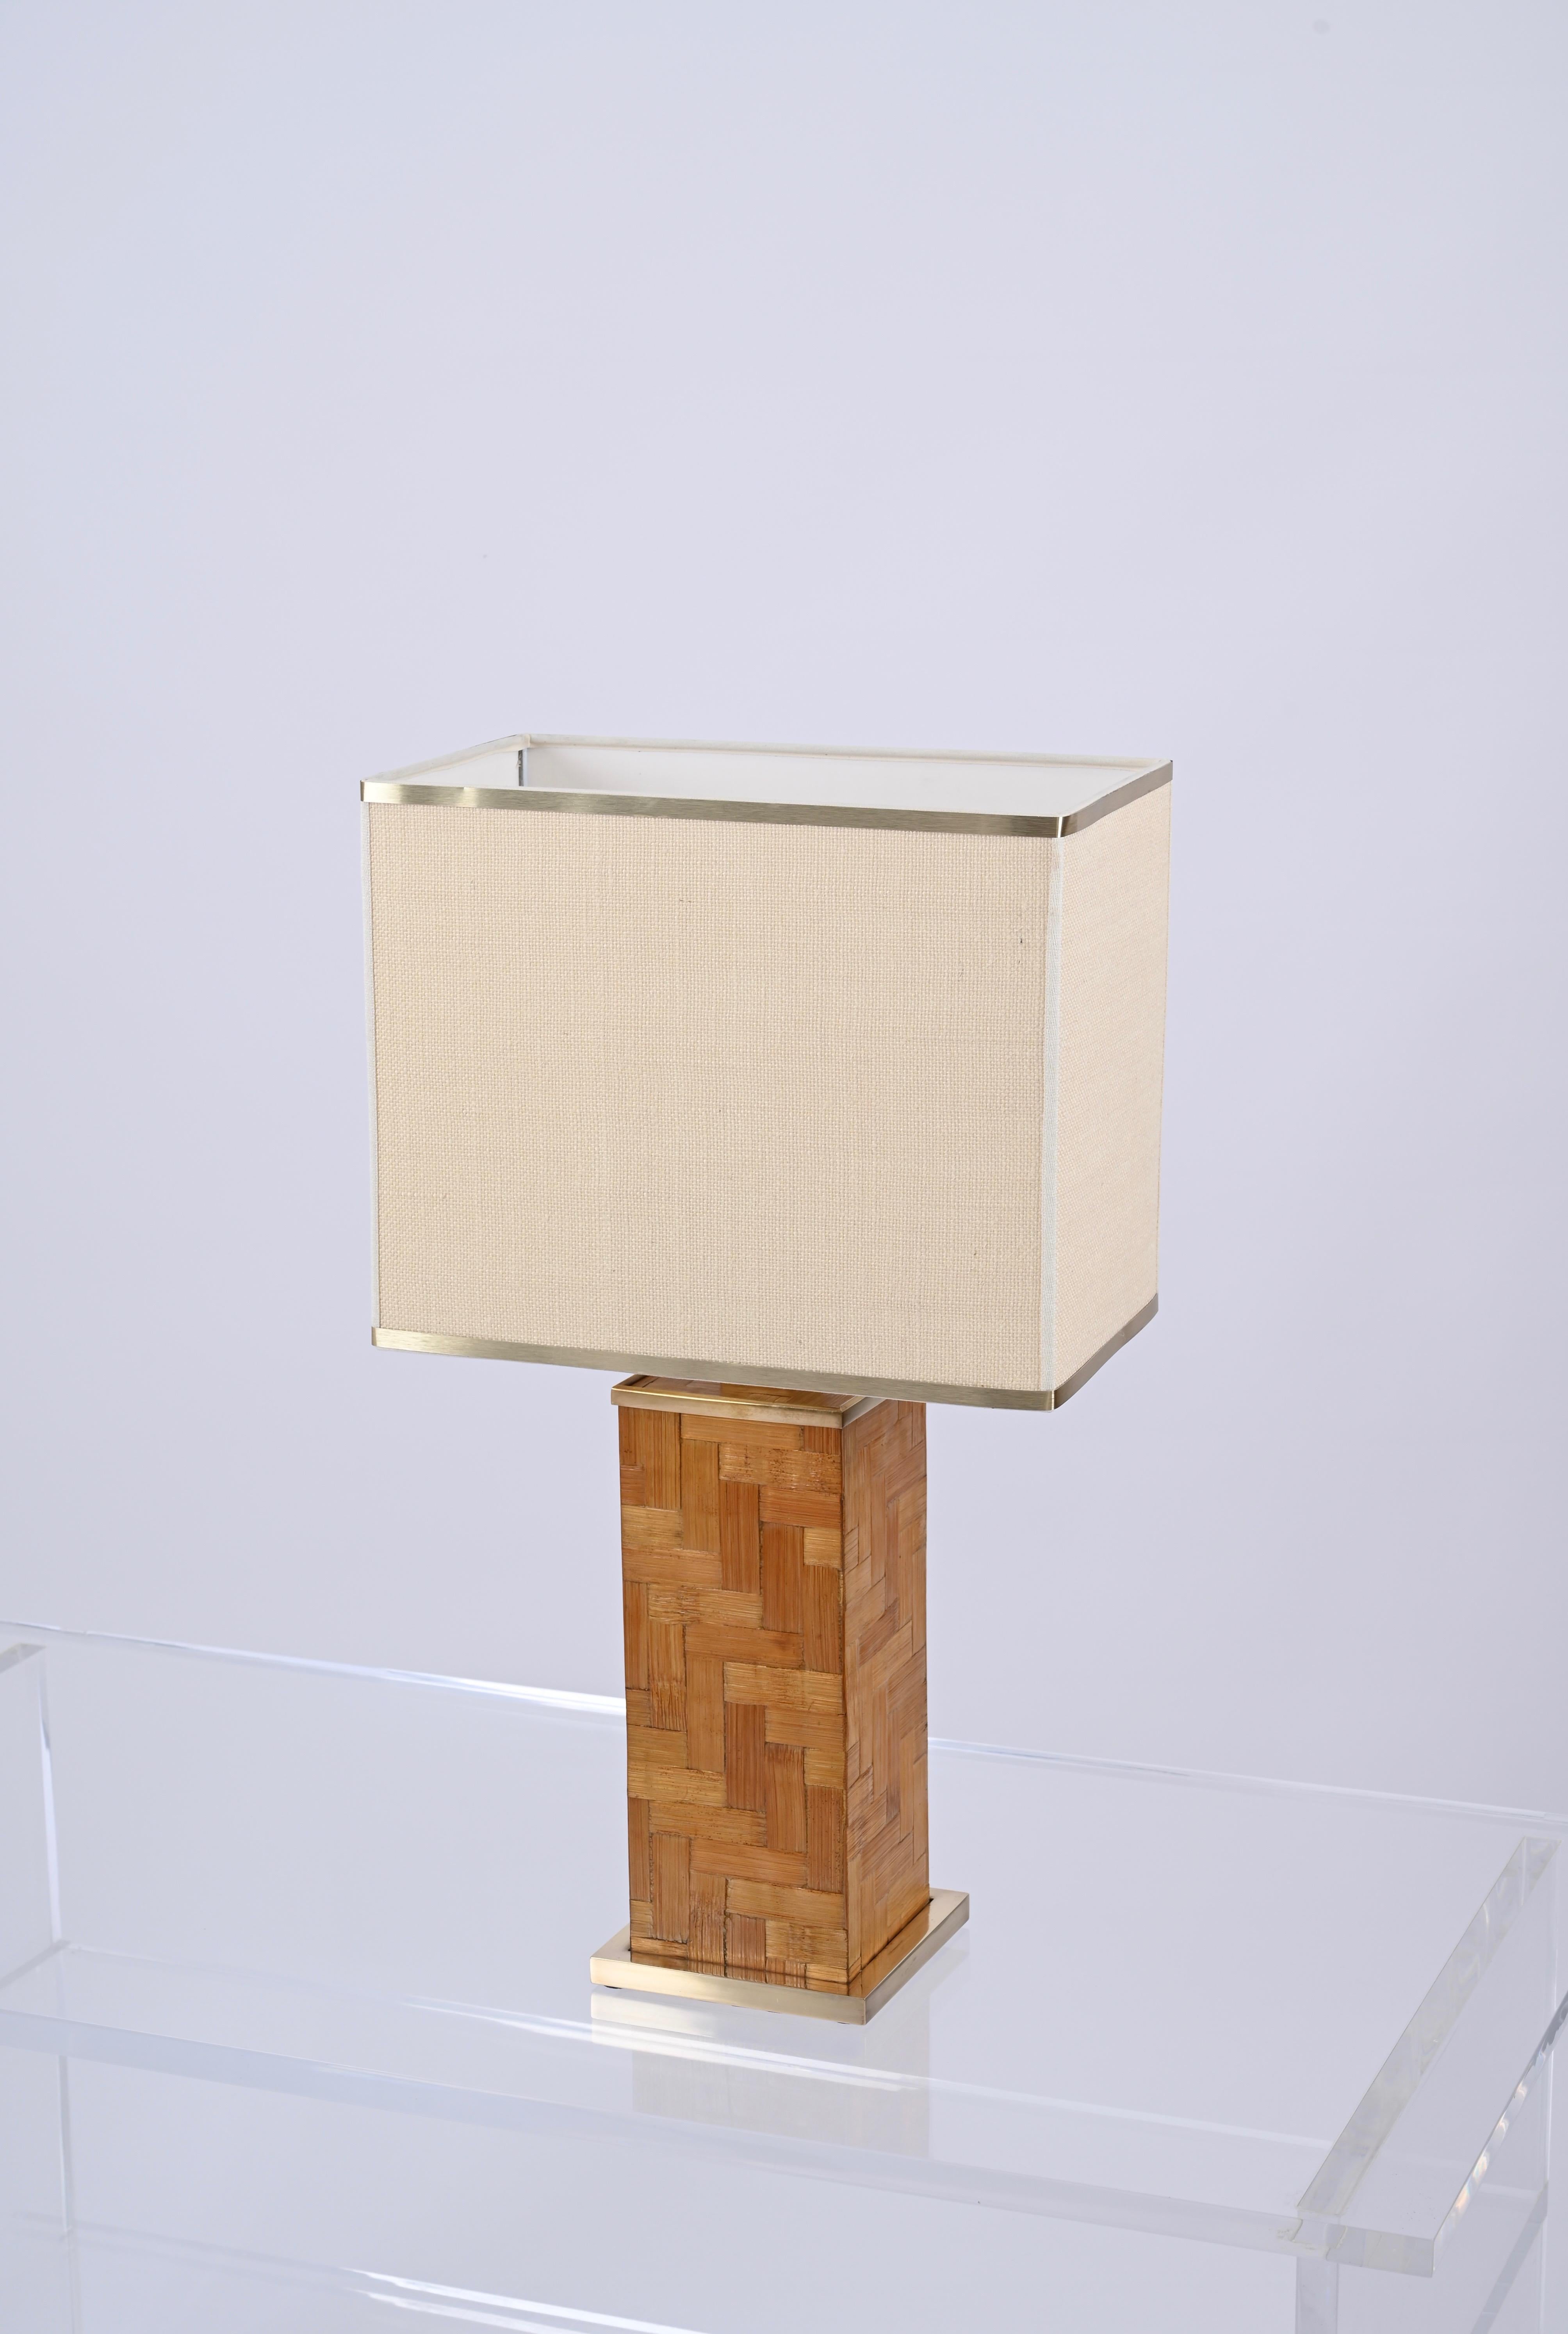 Tommaso Barbi Midcentury Italian Brass and Rattan Square Table Lamp, 1970s For Sale 2